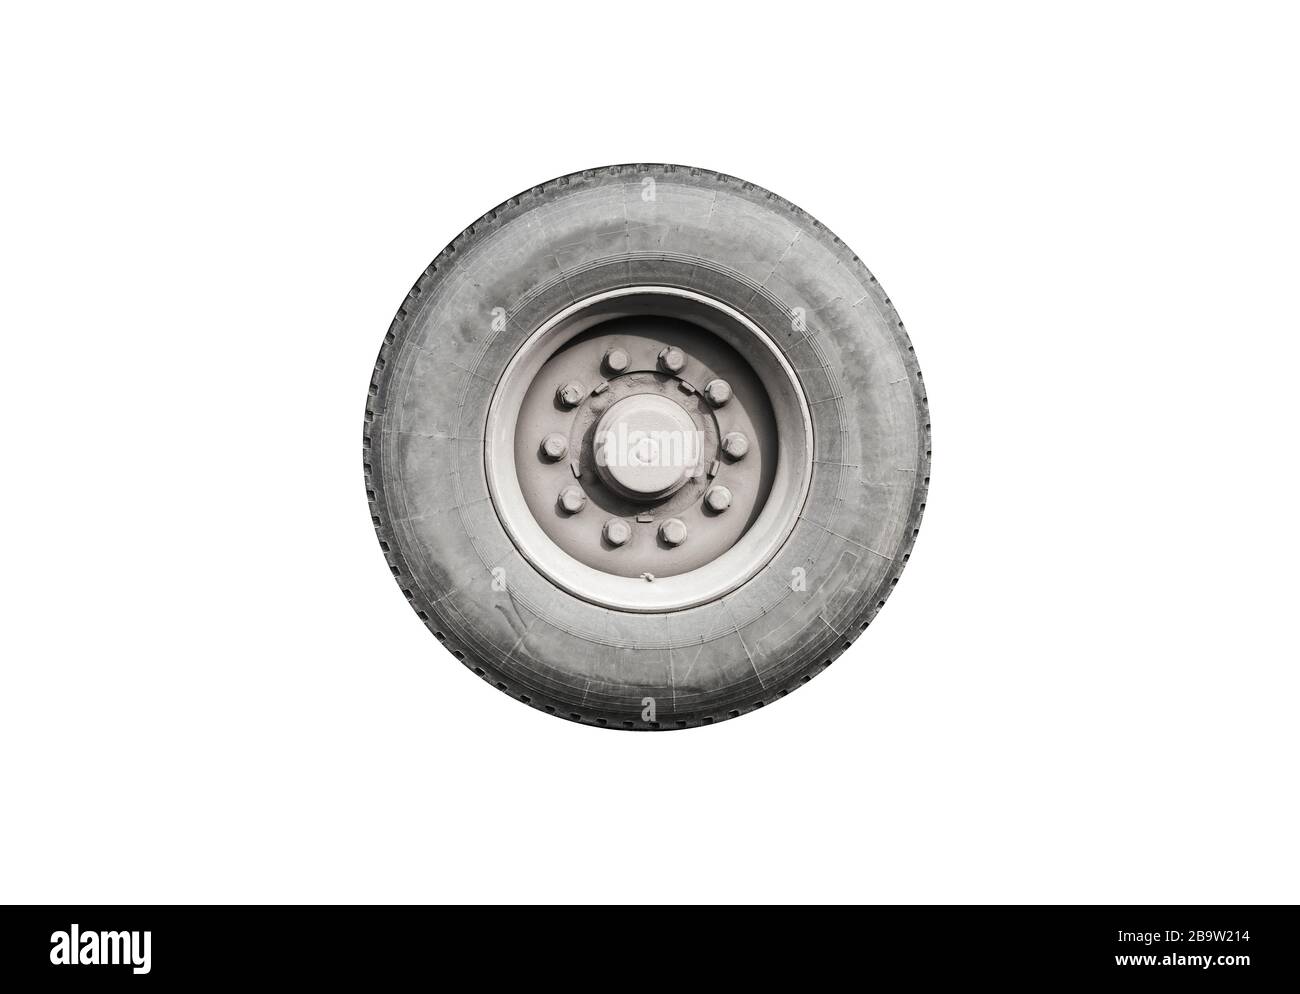 Dirty truck wheel isolated on white background Stock Photo